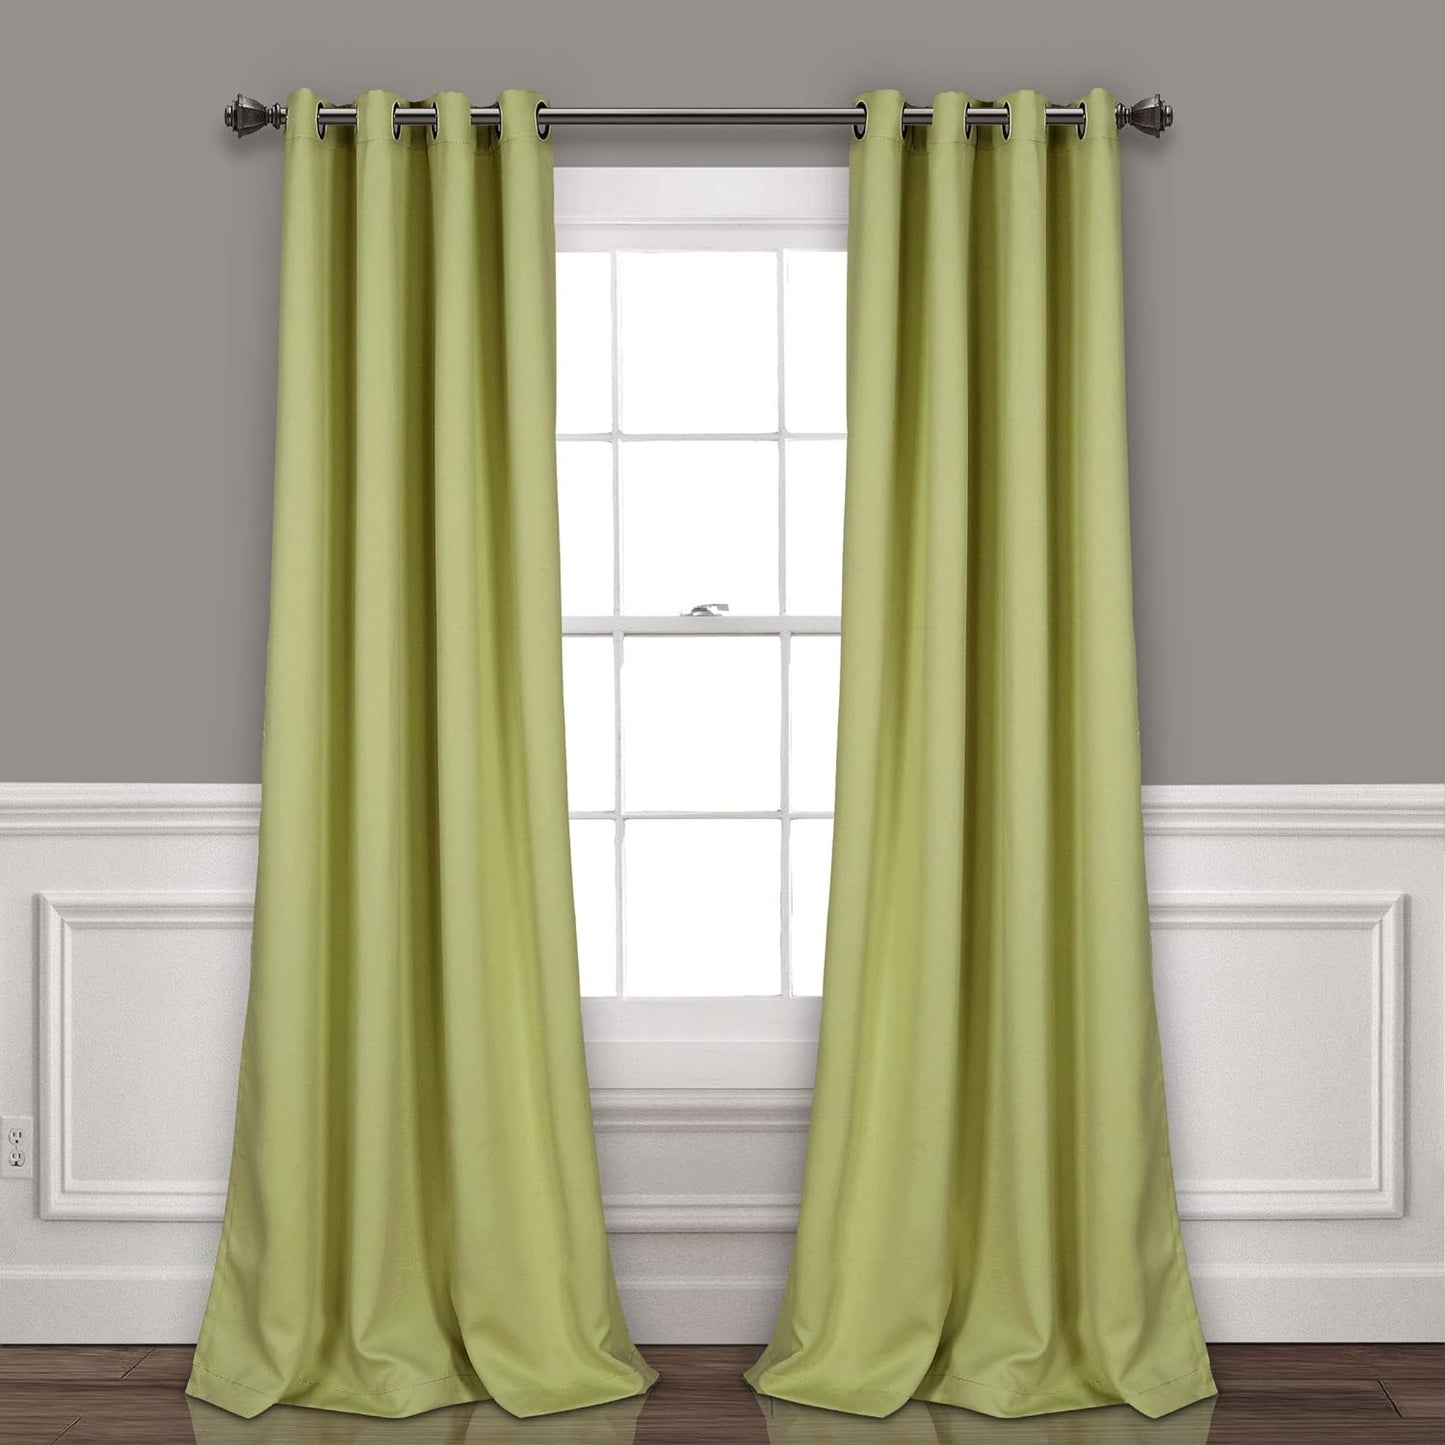 Lush Decor Insulated Grommet Blackout Window Curtain Panels, Pair, 52" W X 120" L, Wheat - Classic Modern Design - 120 Inch Curtains - Extra Long Curtains for Living Room, Bedroom, or Dining Room  Triangle Home Fashions Sage 52"W X 95"L 